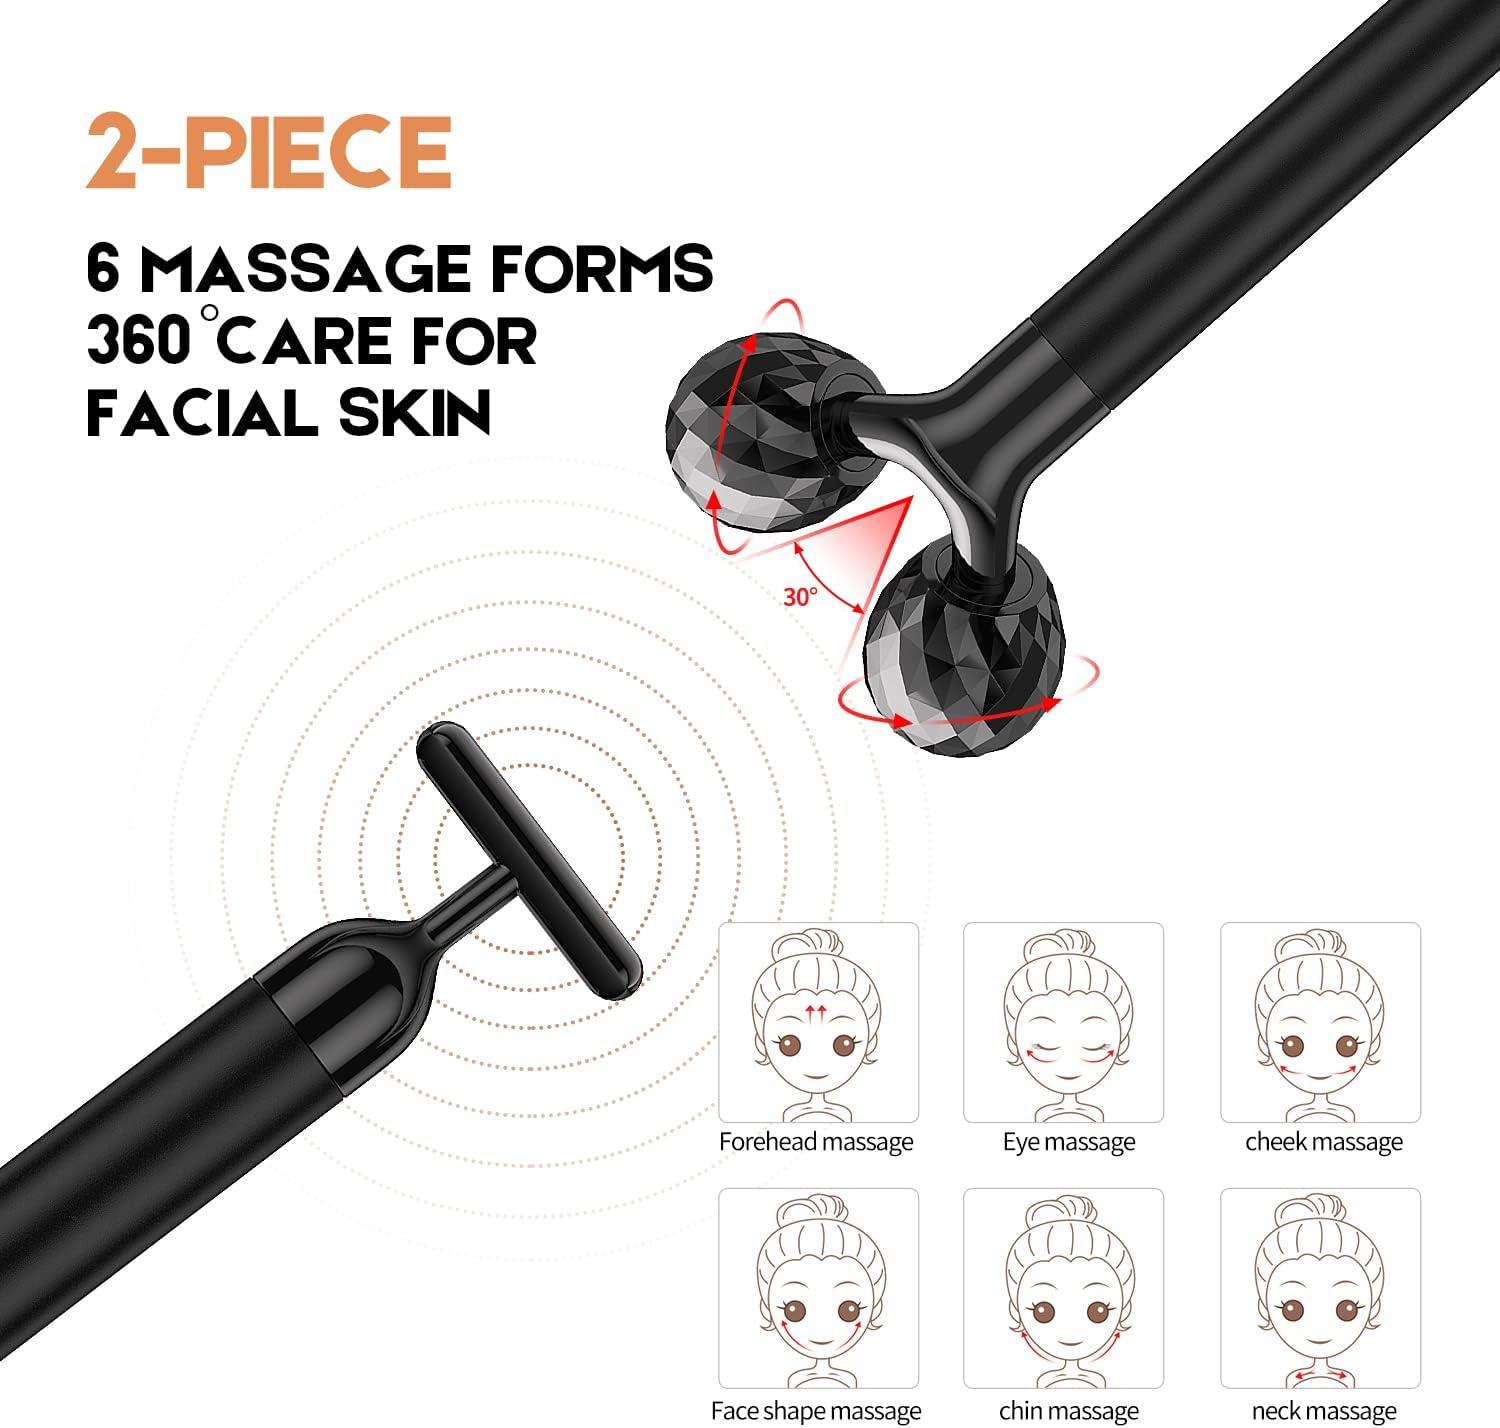 10 Best Face Massage Tools 2022 - Top-Rated Facial Massagers